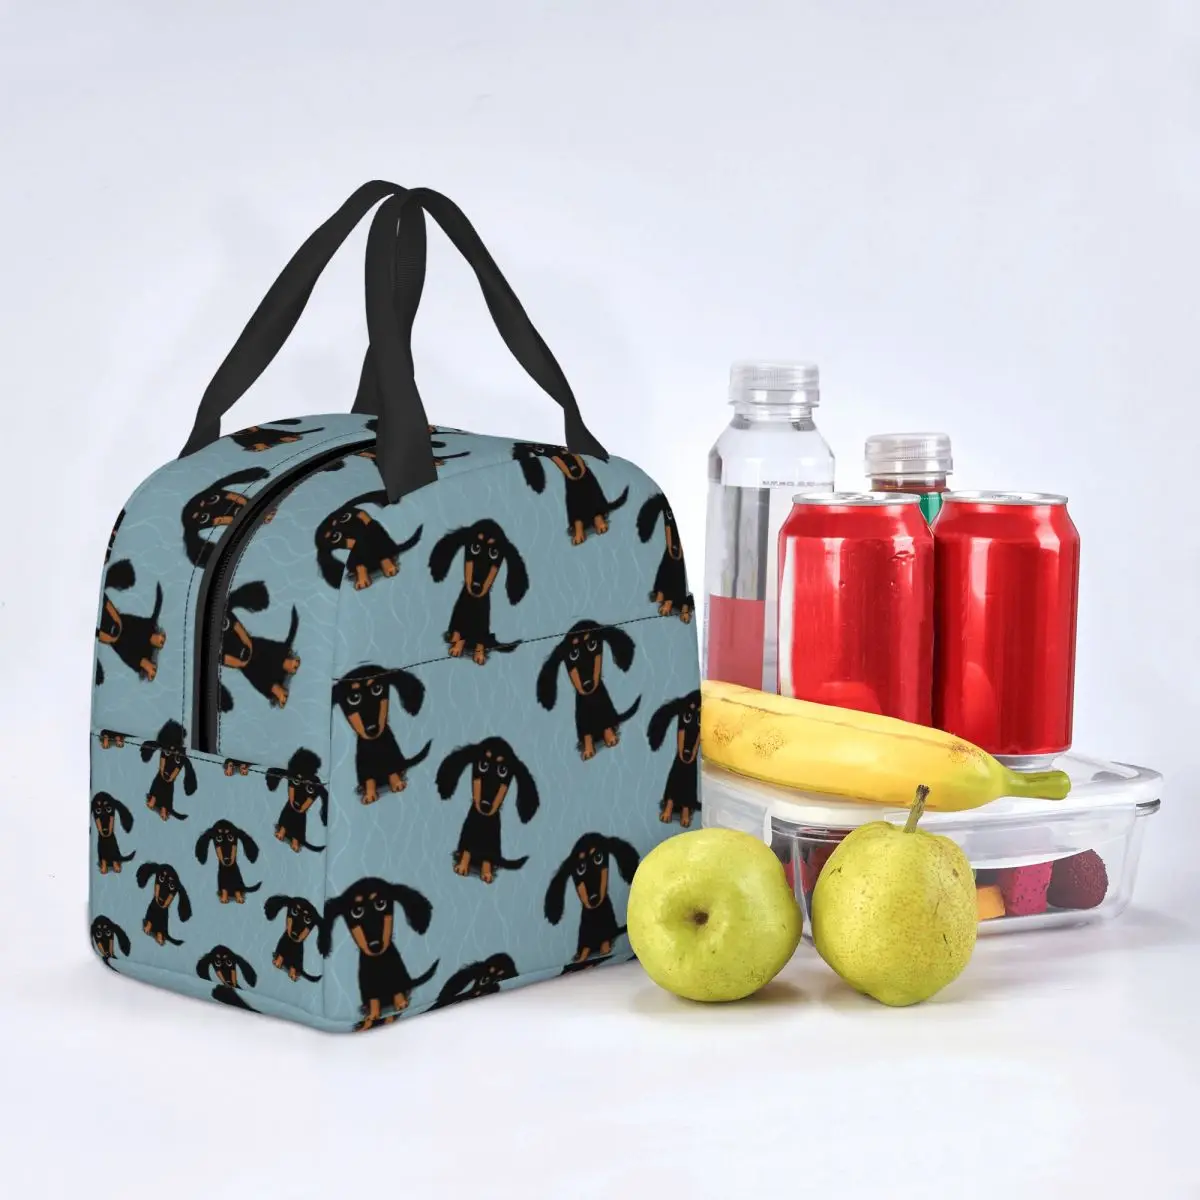 Longhaired Dachshund Puppy Dog Lunch Bags Waterproof Insulated Oxford Cooler Bag Animal Thermal School Lunch Box for Women Girl